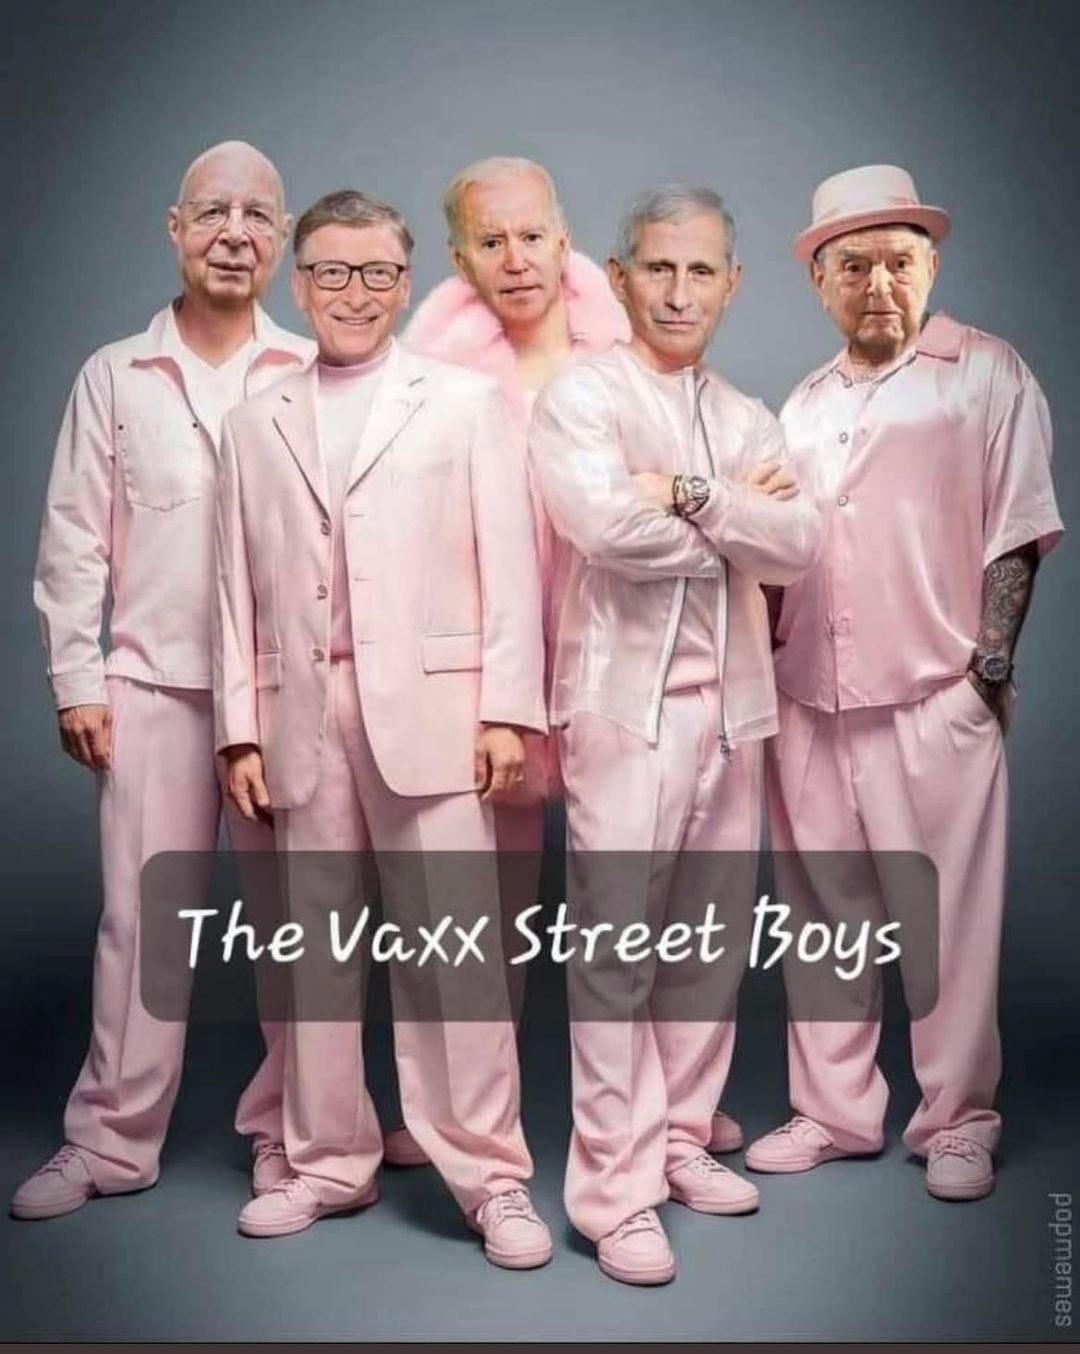 May be an image of 5 people, people standing and text that says 'The Vaxx Street Boys'